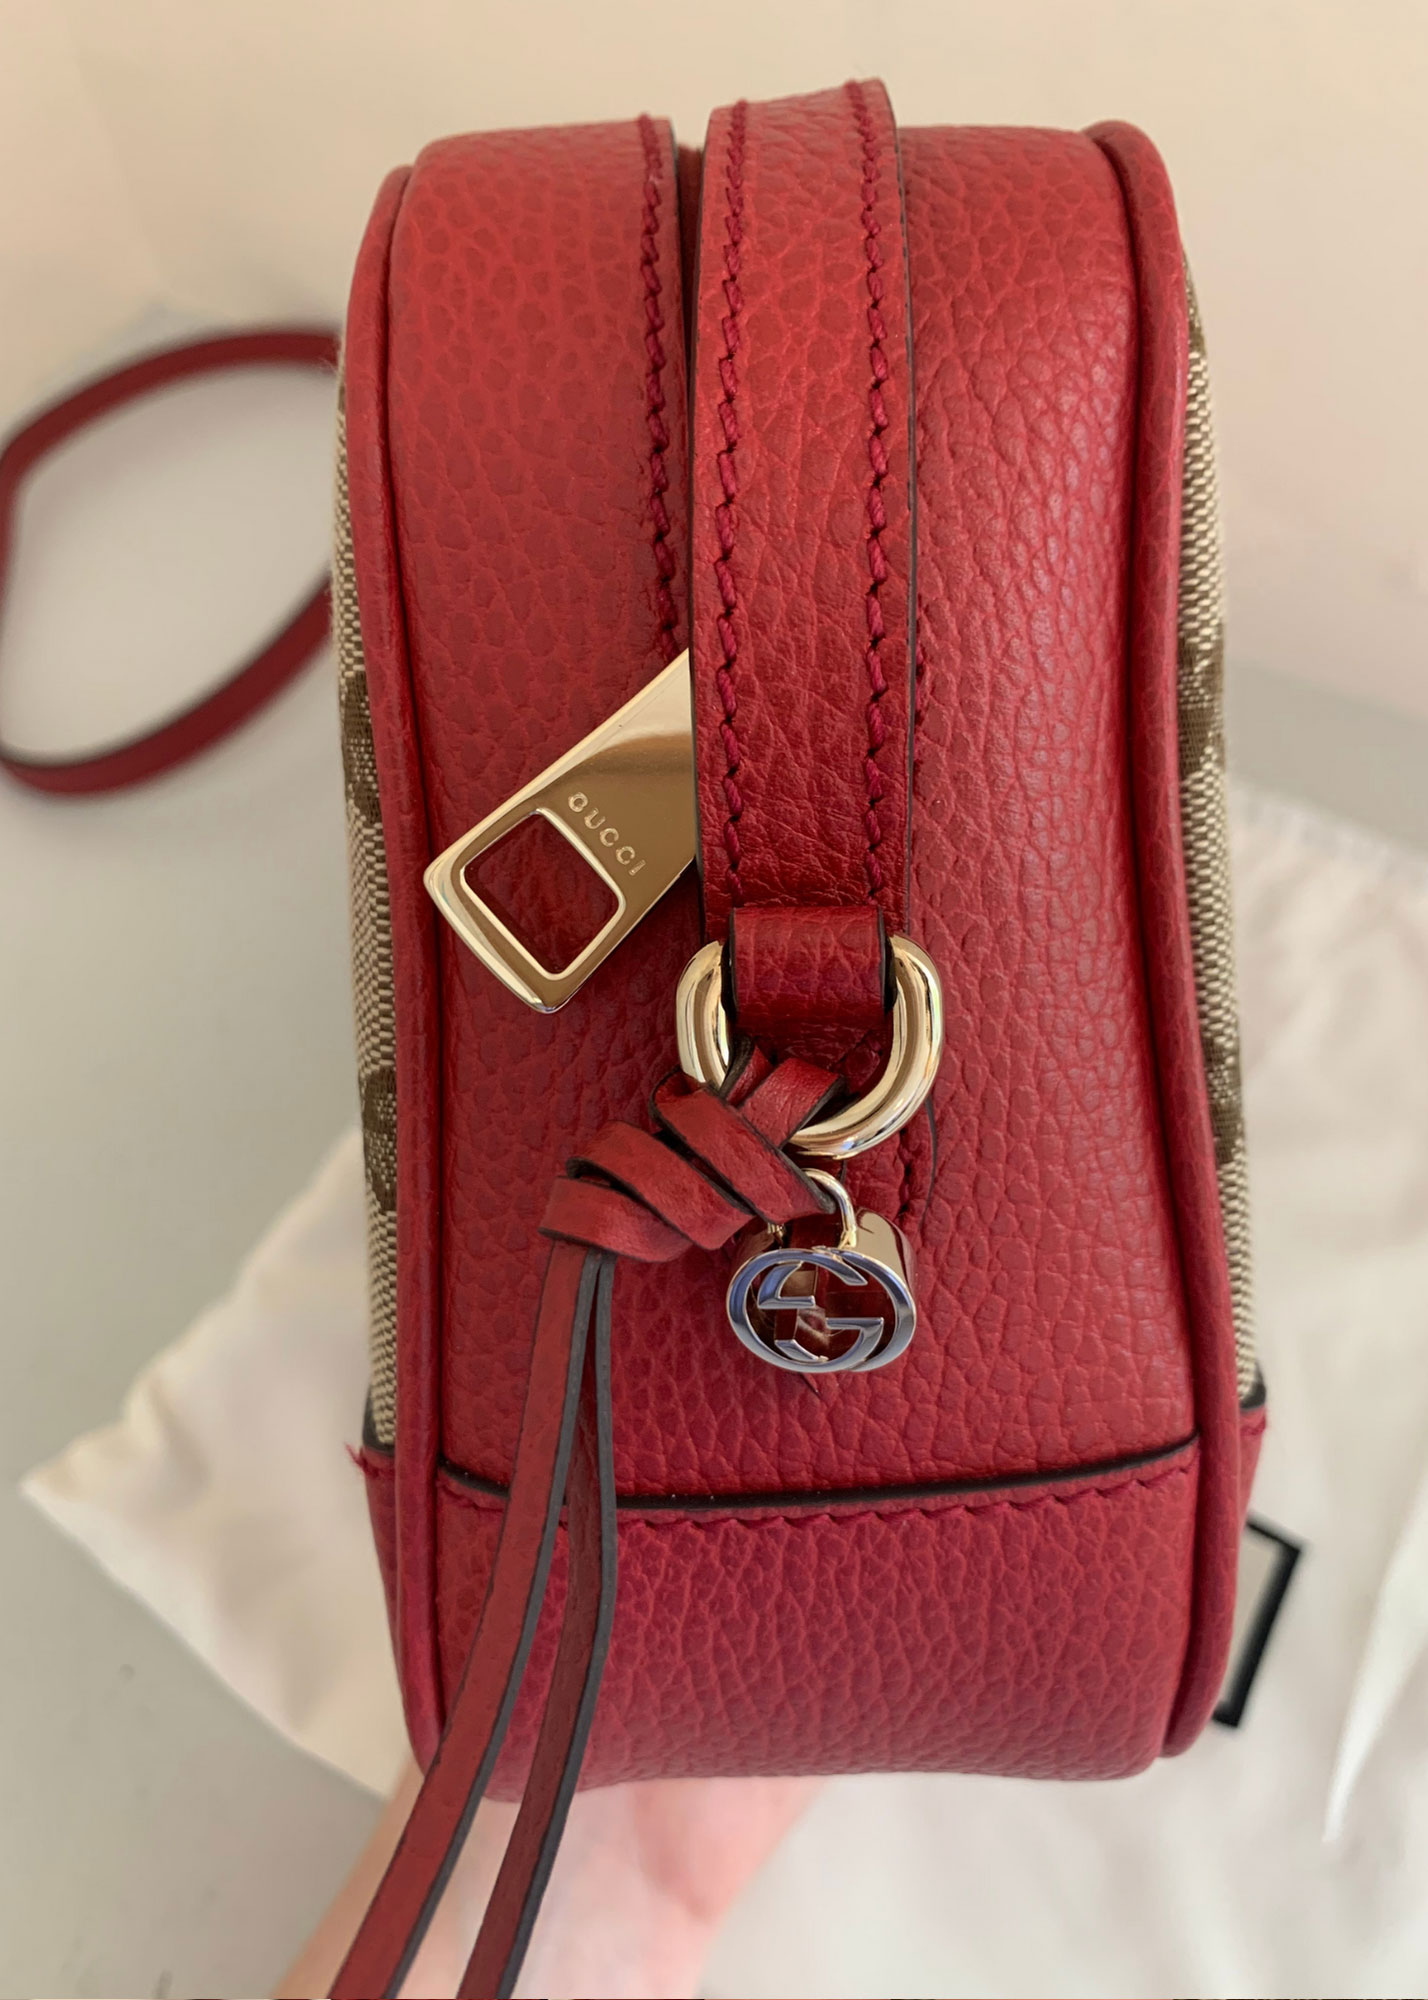 Leather Top Handle Bag Strap - For Louis Vuitton, Chanel, Gucci